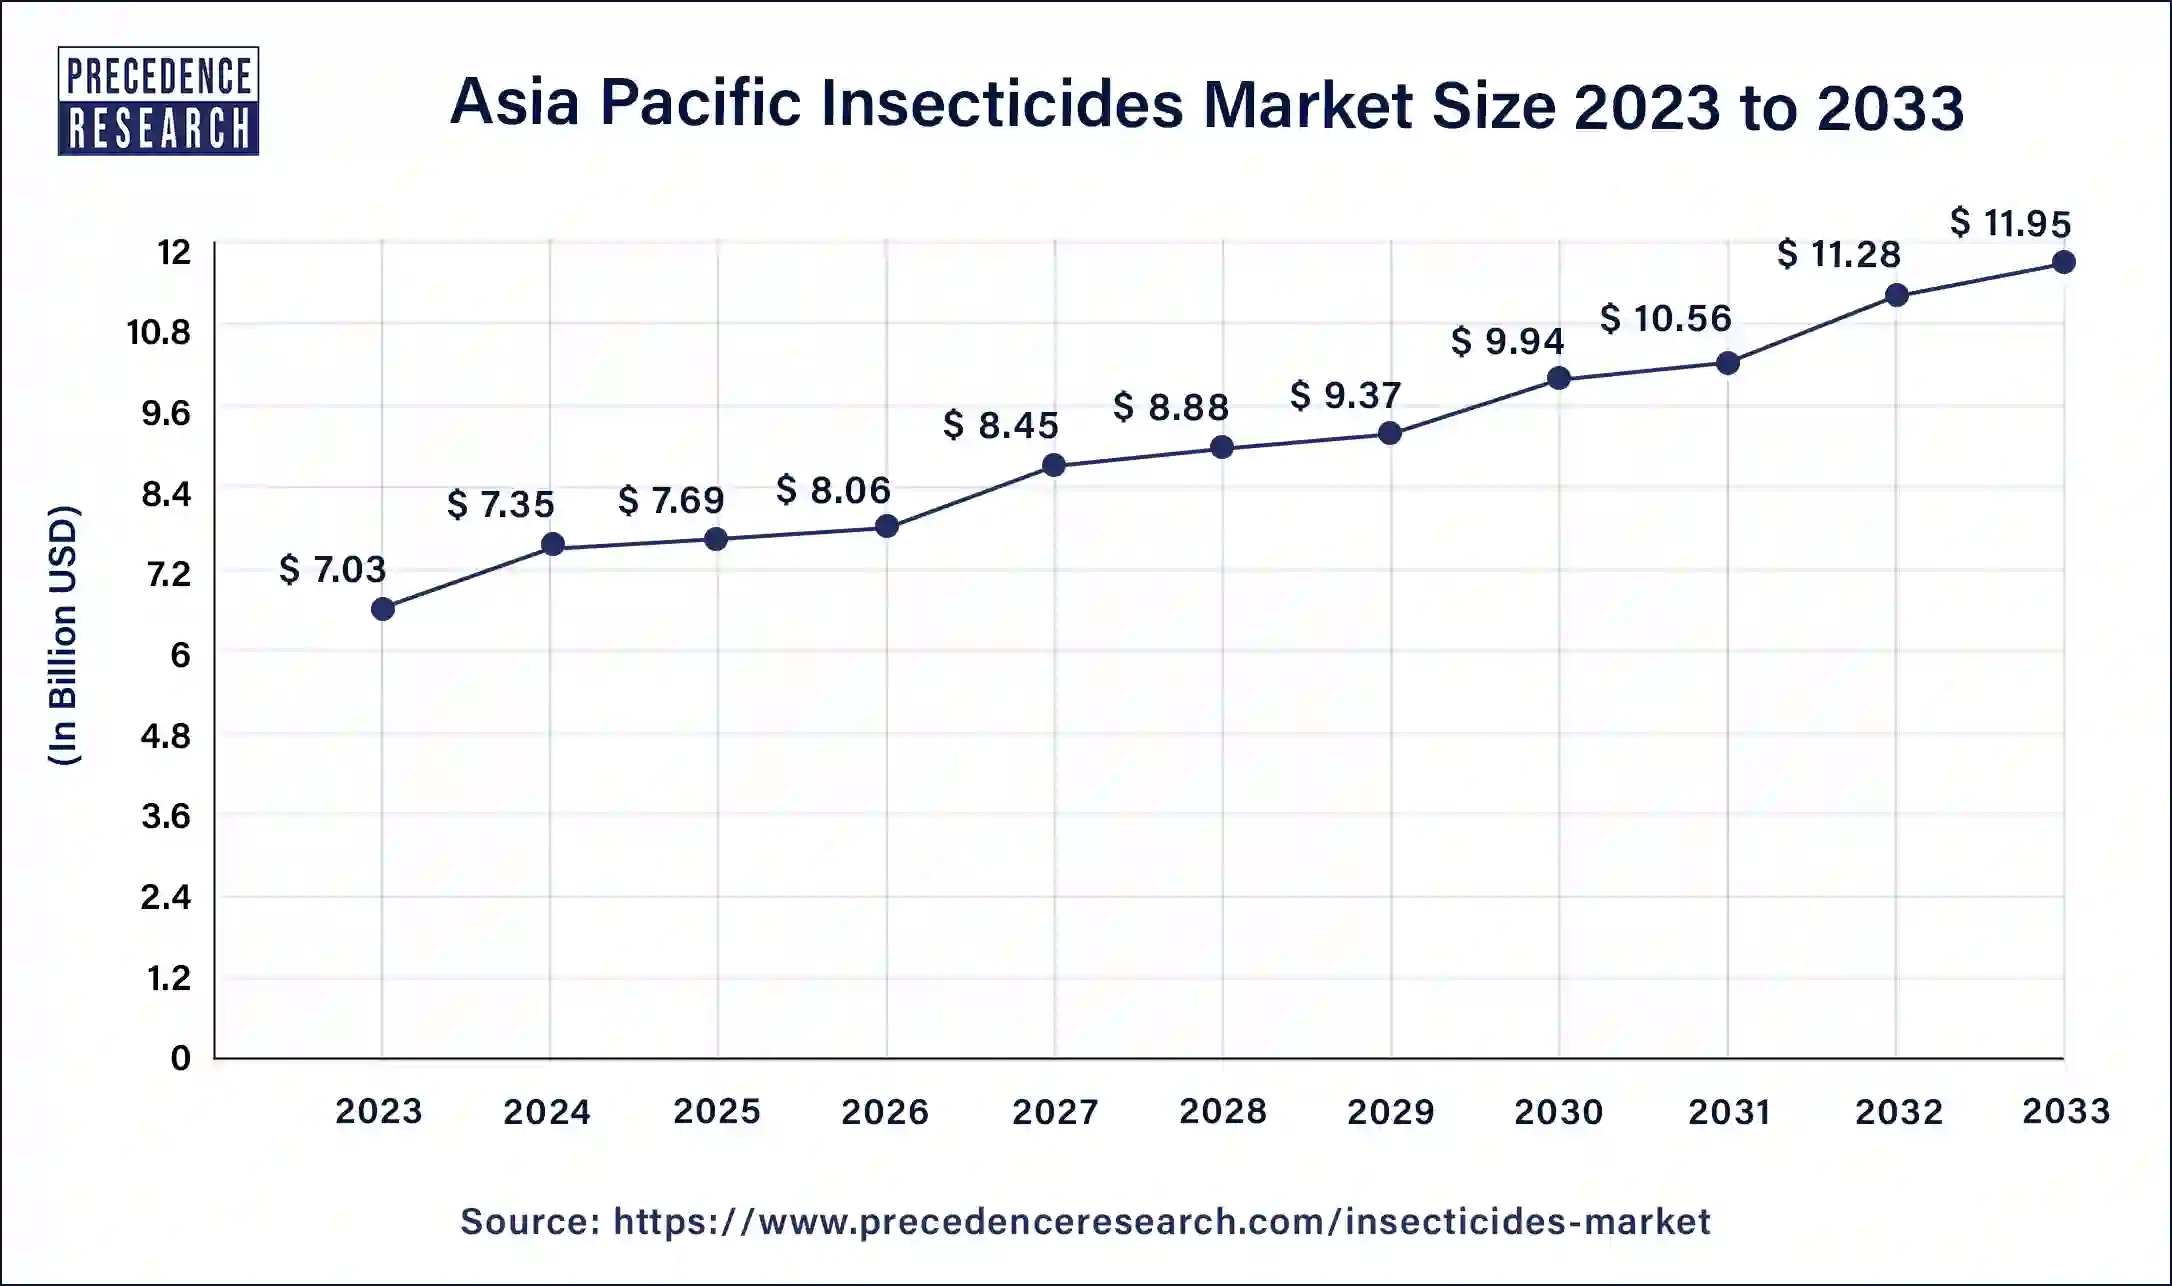 Asia Pacific Insecticides Market Size 2024 to 2033